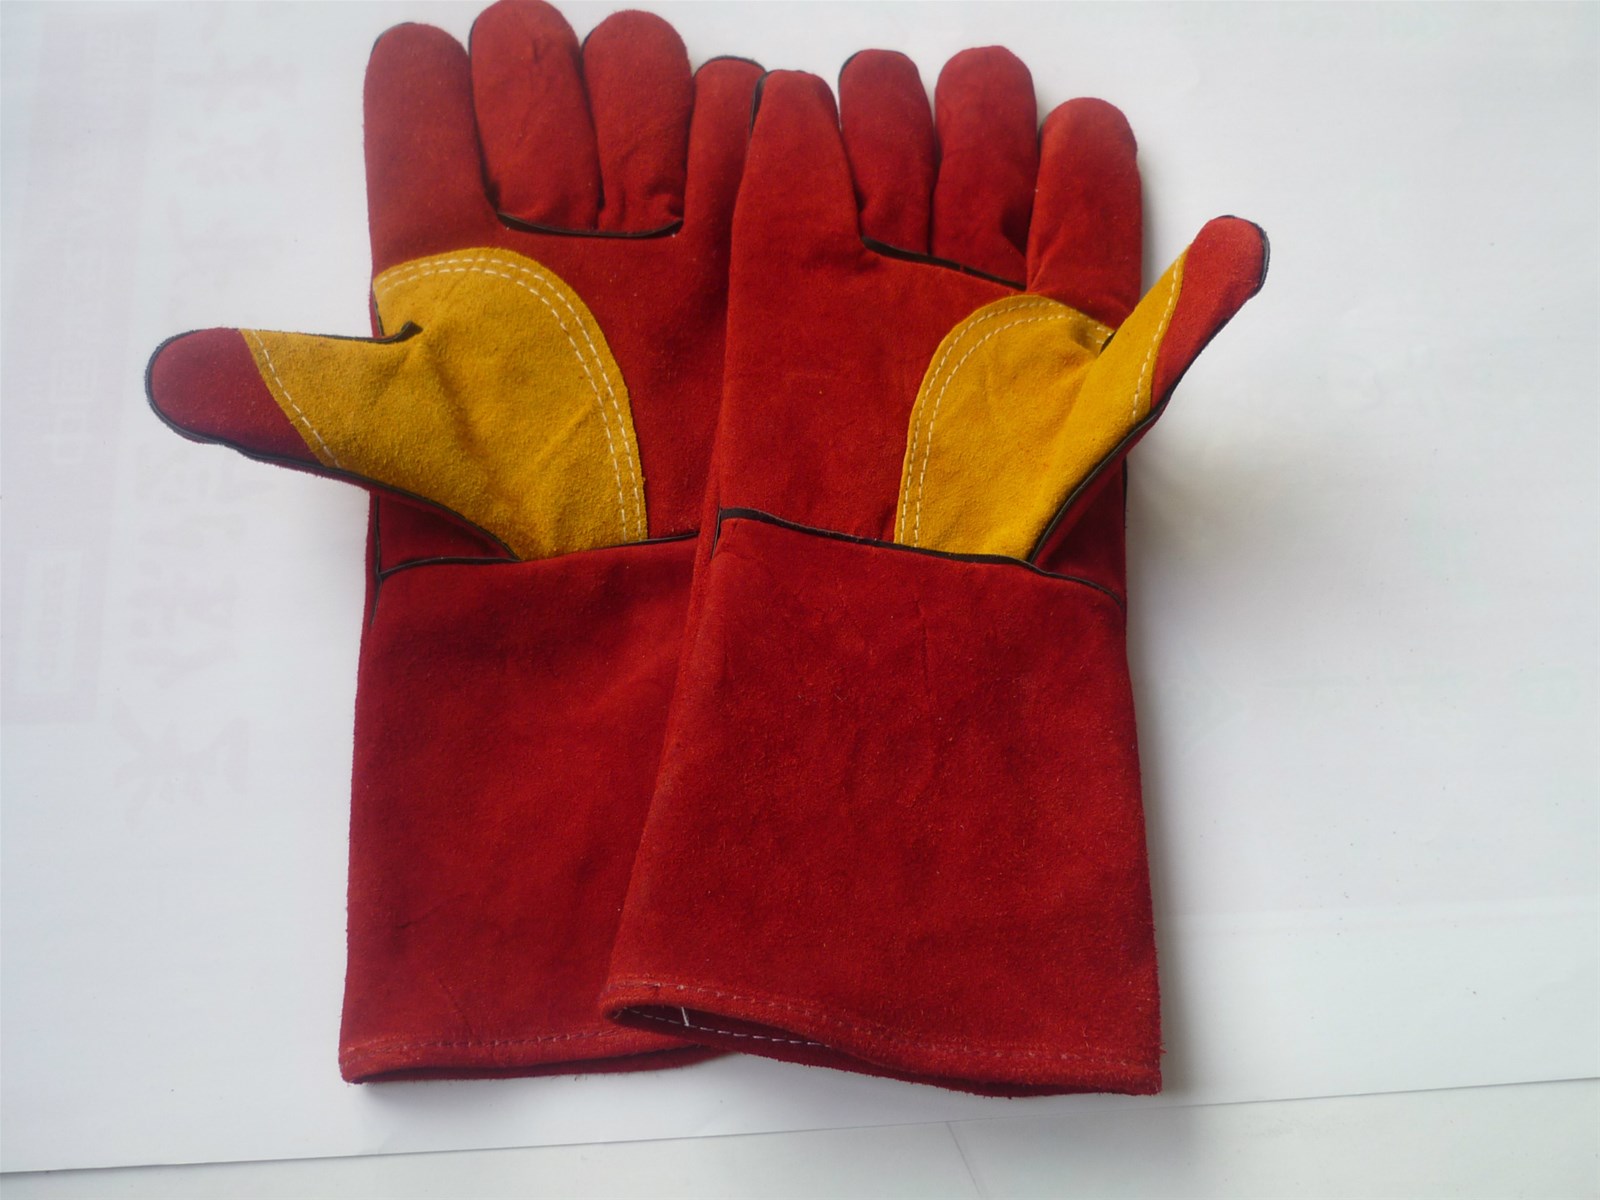 best sale and quality welded glove